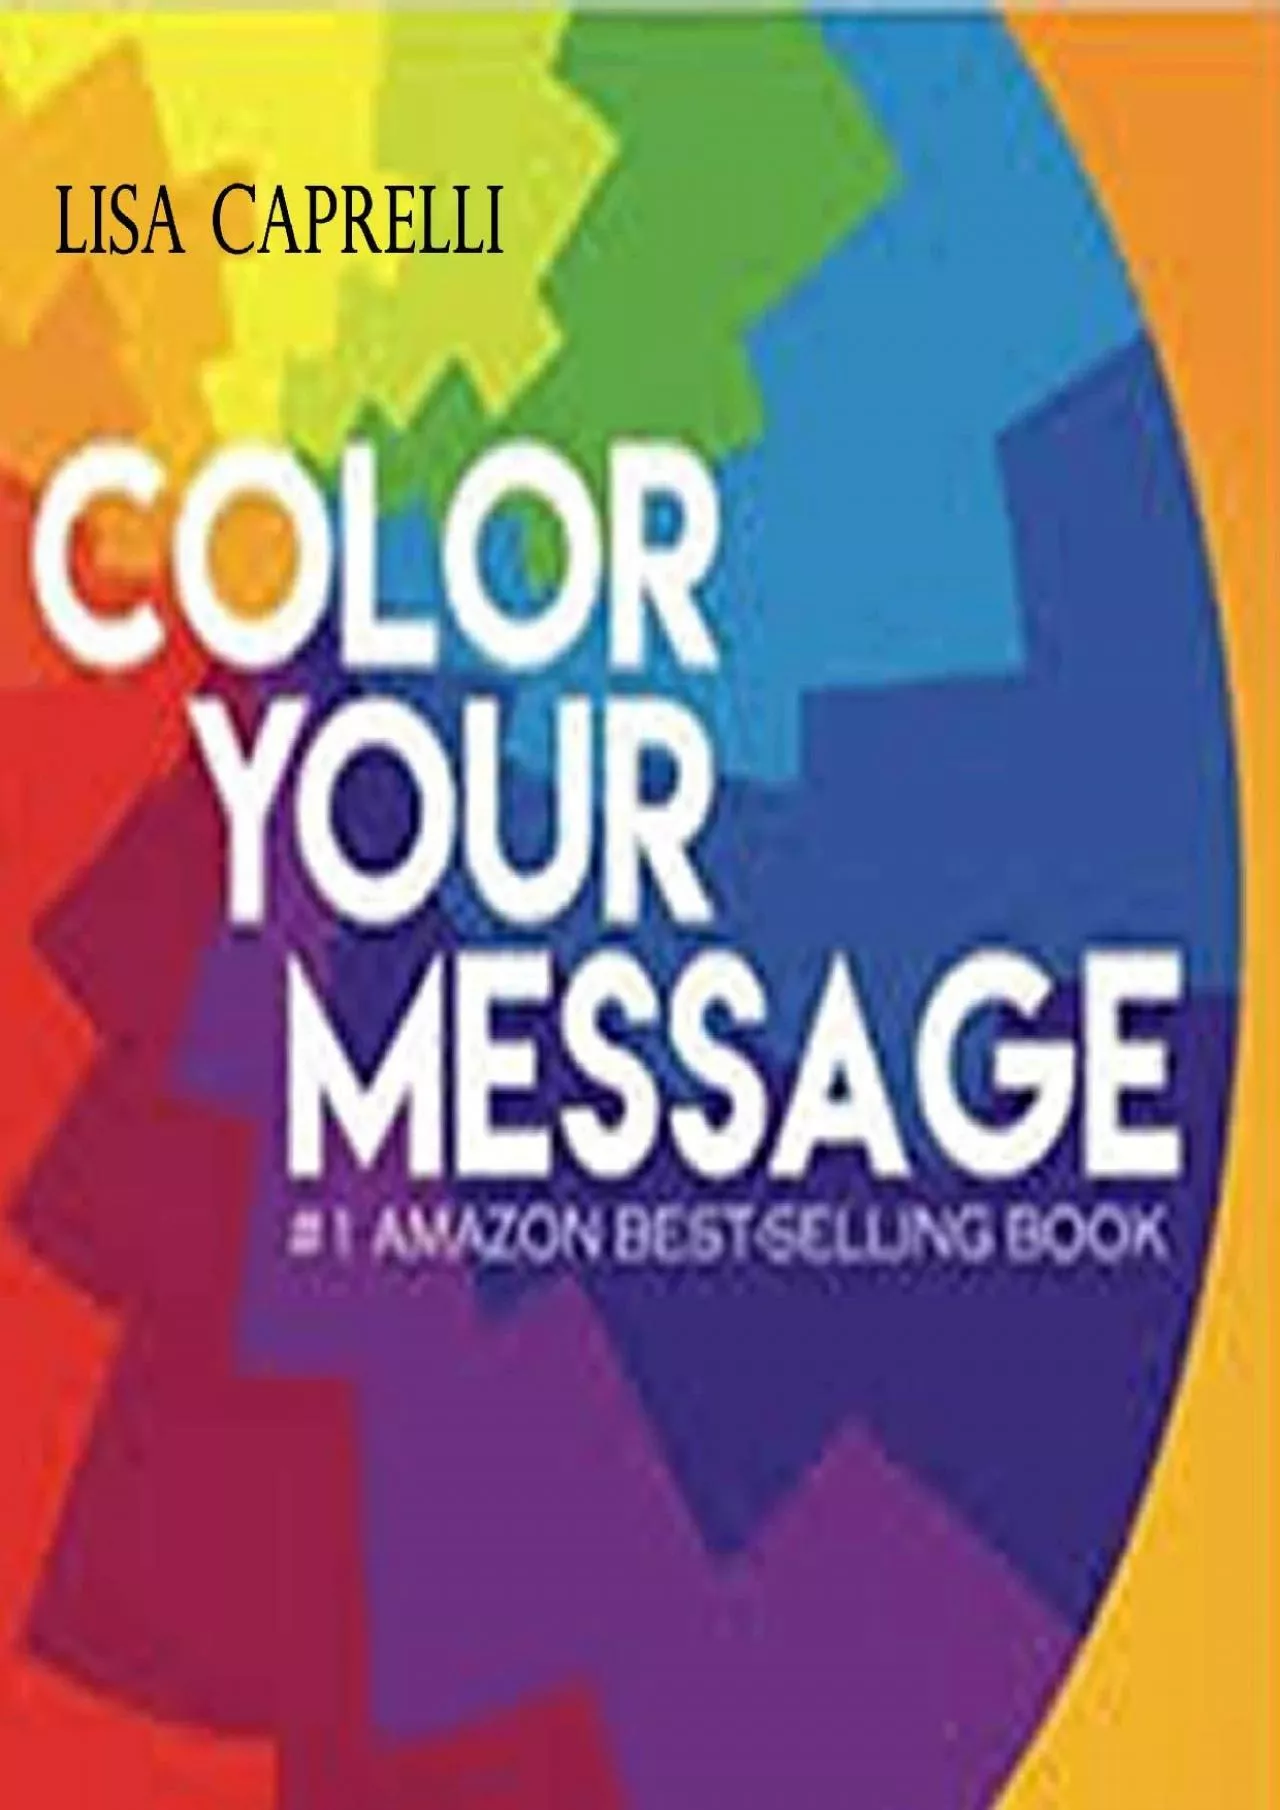 Color Your Message: The Art of Digital Marketing and Social Media